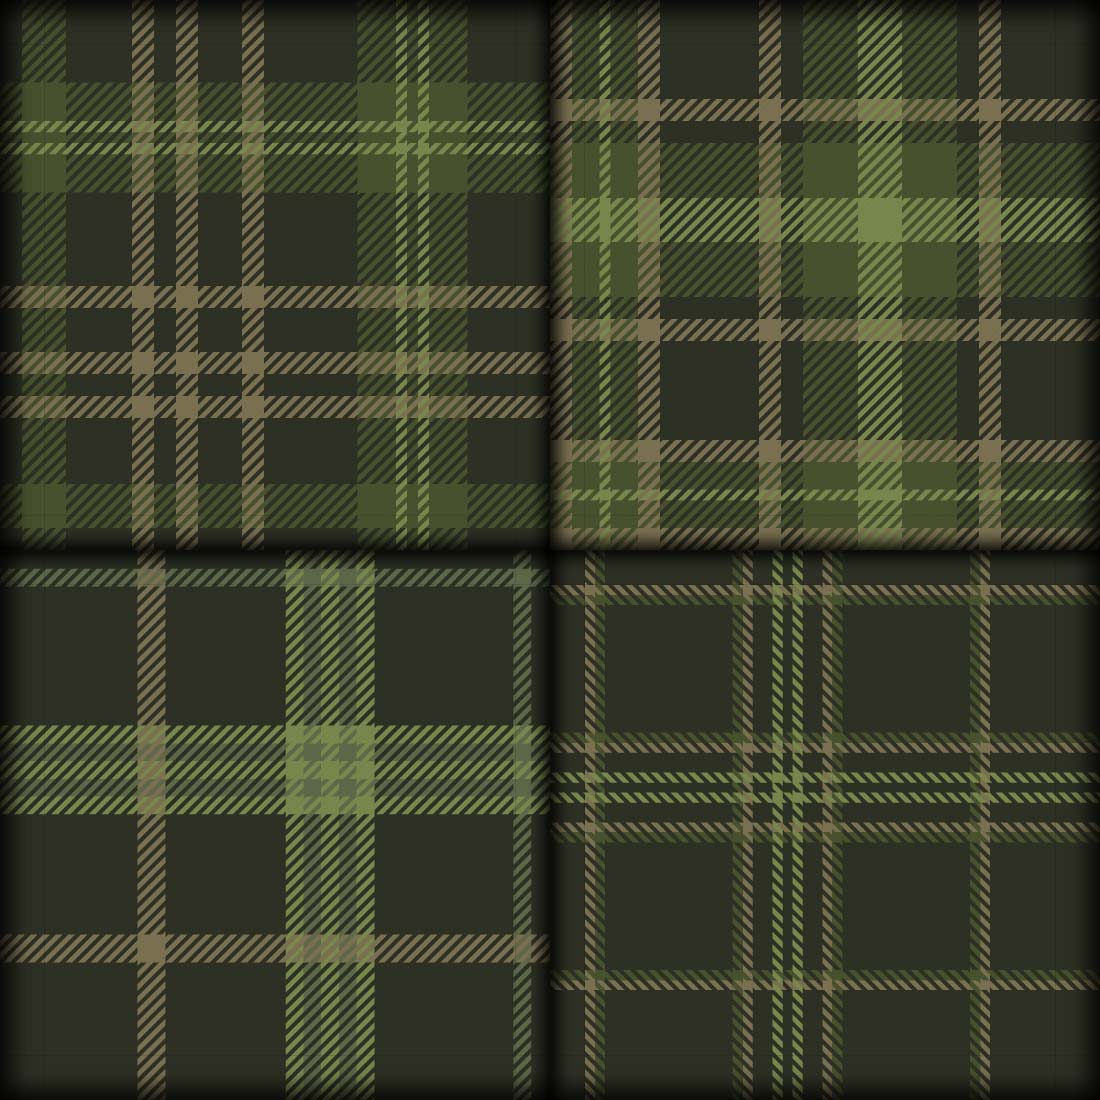 Texture vintage seamless plaid pattern set graphic vector illustration Only $ preview image.